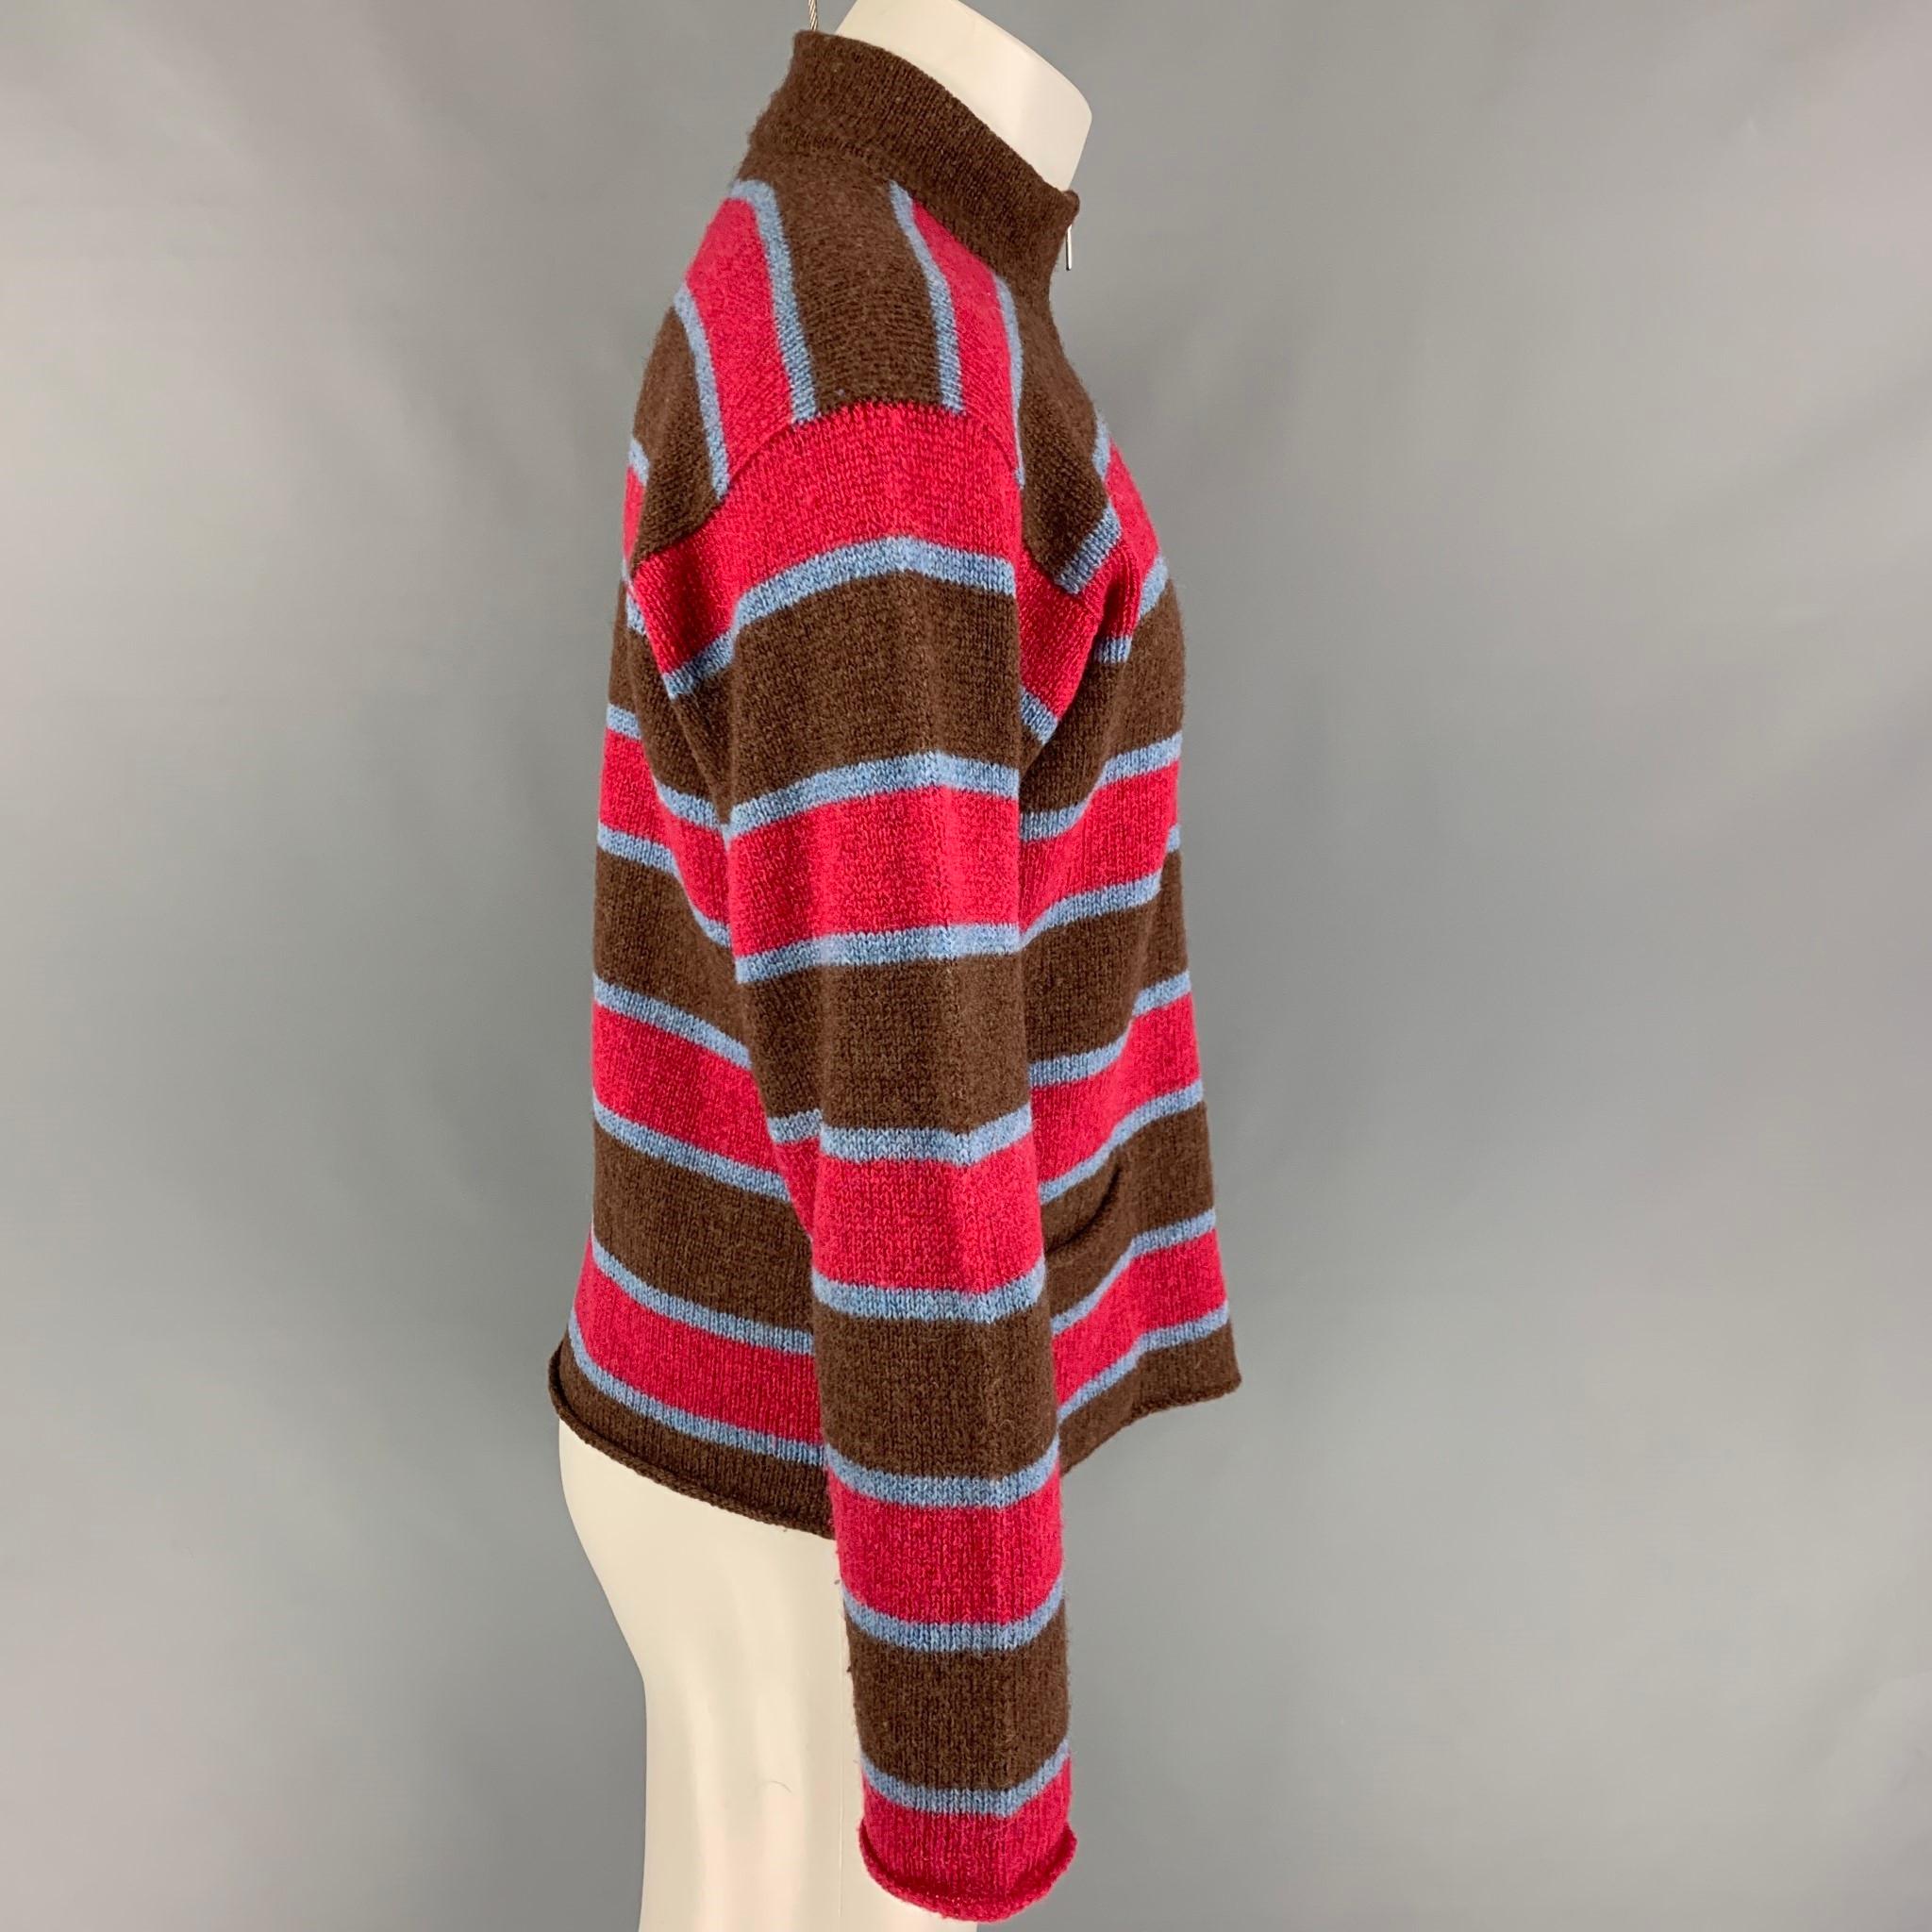 COMME des GARCONS SHIRT jacket comes in a brown & red stripe wool featuring a high collar, front pockets, and a full zip up closure. 

Very Good Pre-Owned Condition.
Marked: S

Measurements:

Shoulder: 21.5 in.
Chest: 45 in.
Sleeve: 24 in.
Length: